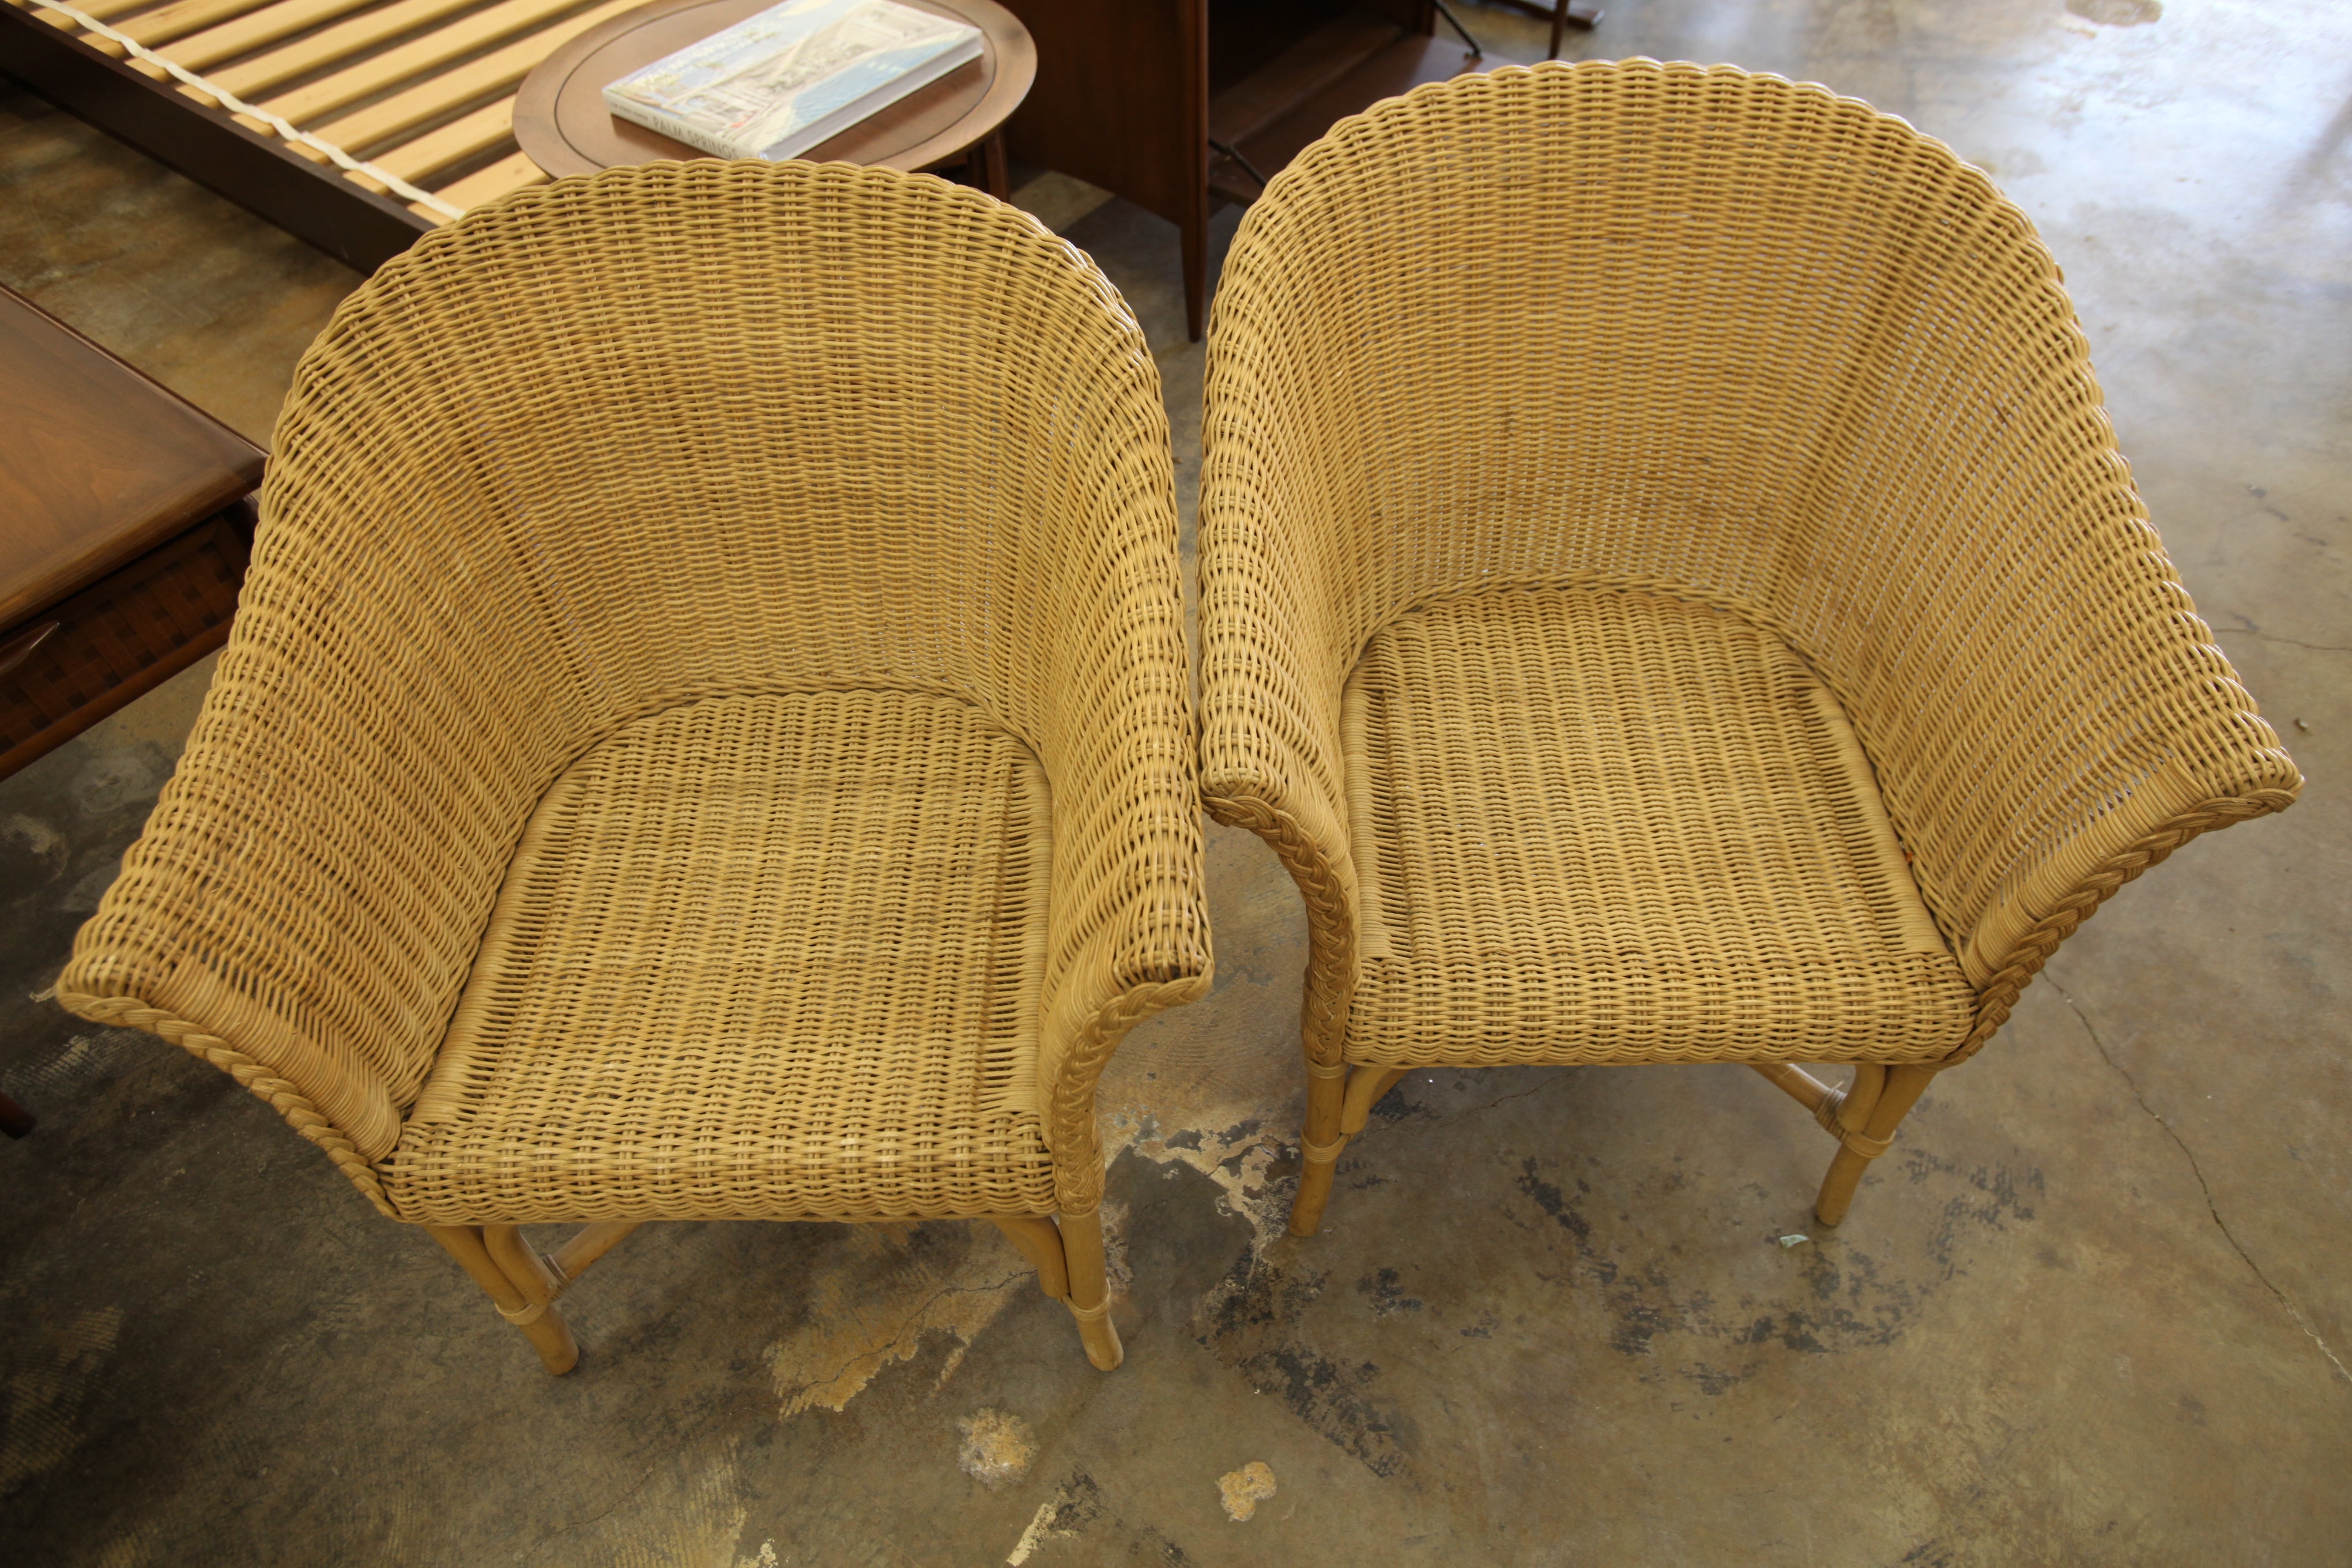 Set of 2 Vintage Wicker Chairs (26"W x 30"H x 16"H seat)